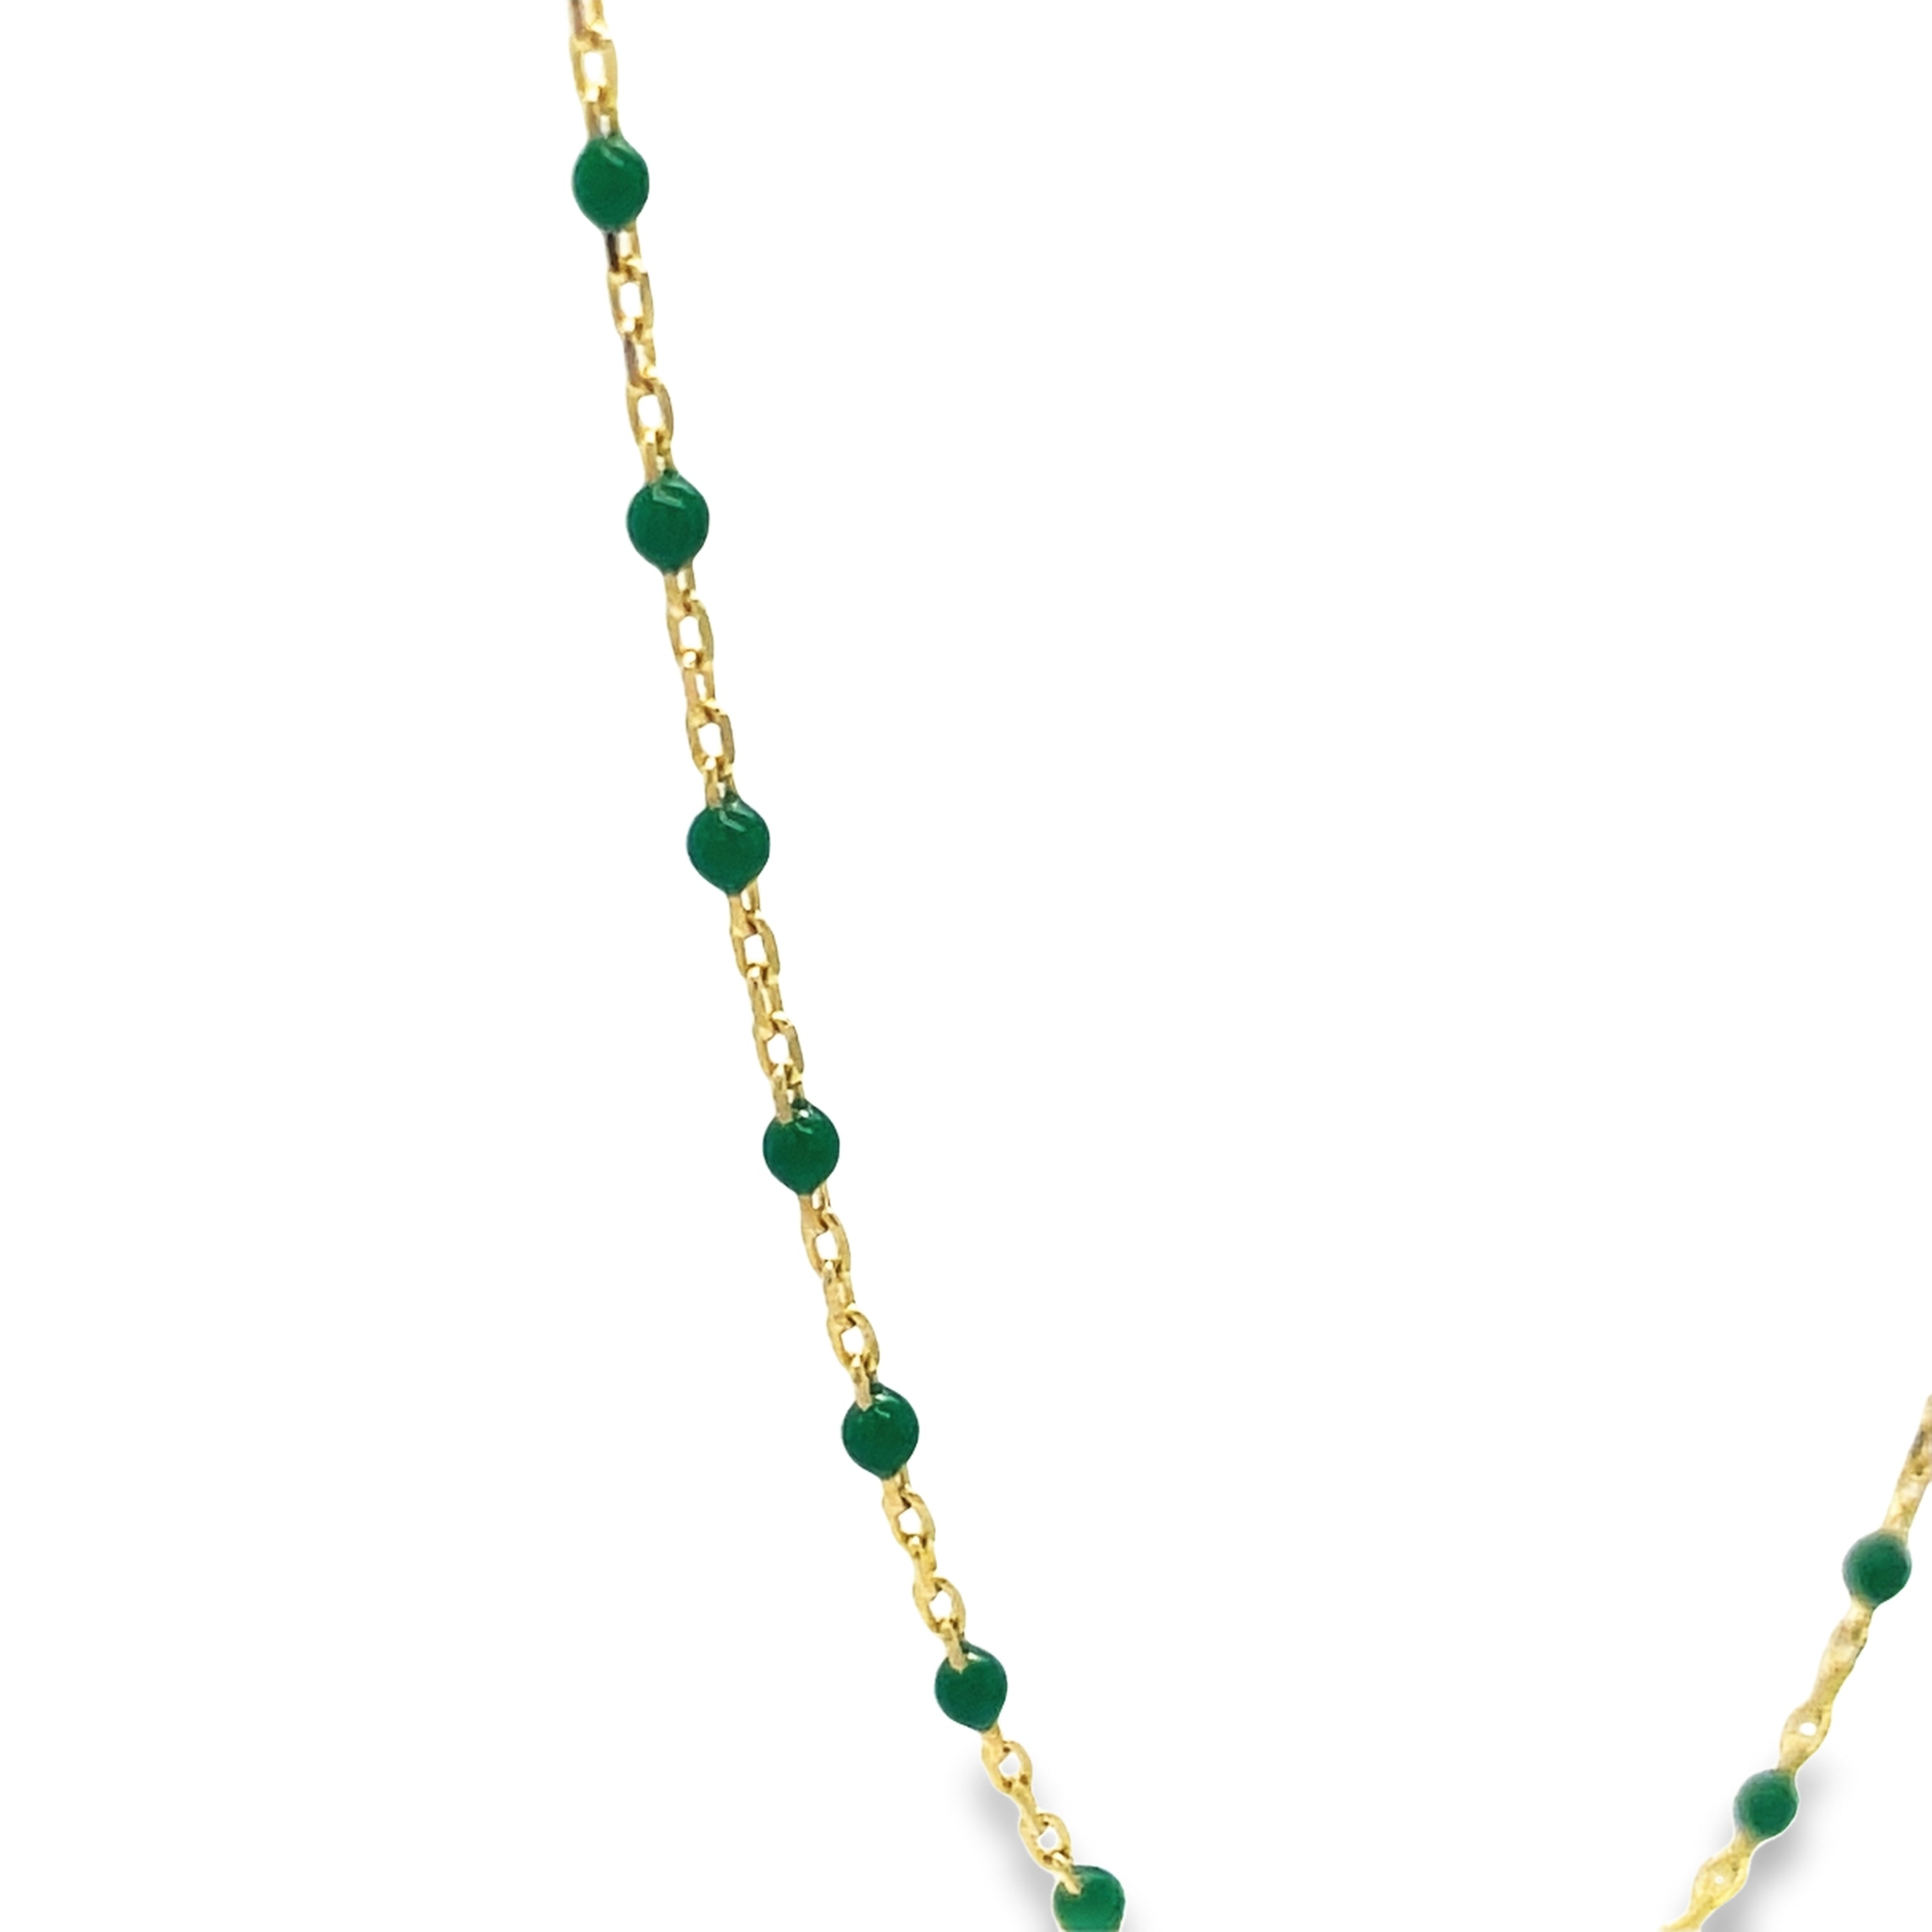 Expertly crafted with 14k yellow gold, this necklace boasts a sleek 18" length and features delicate, small enamel beads in a sophisticated green hue. The addition of a convenient sizing loop ensures perfect and comfortable fit. Enhance any outfit with this elegant and timeless piece of jewelry.